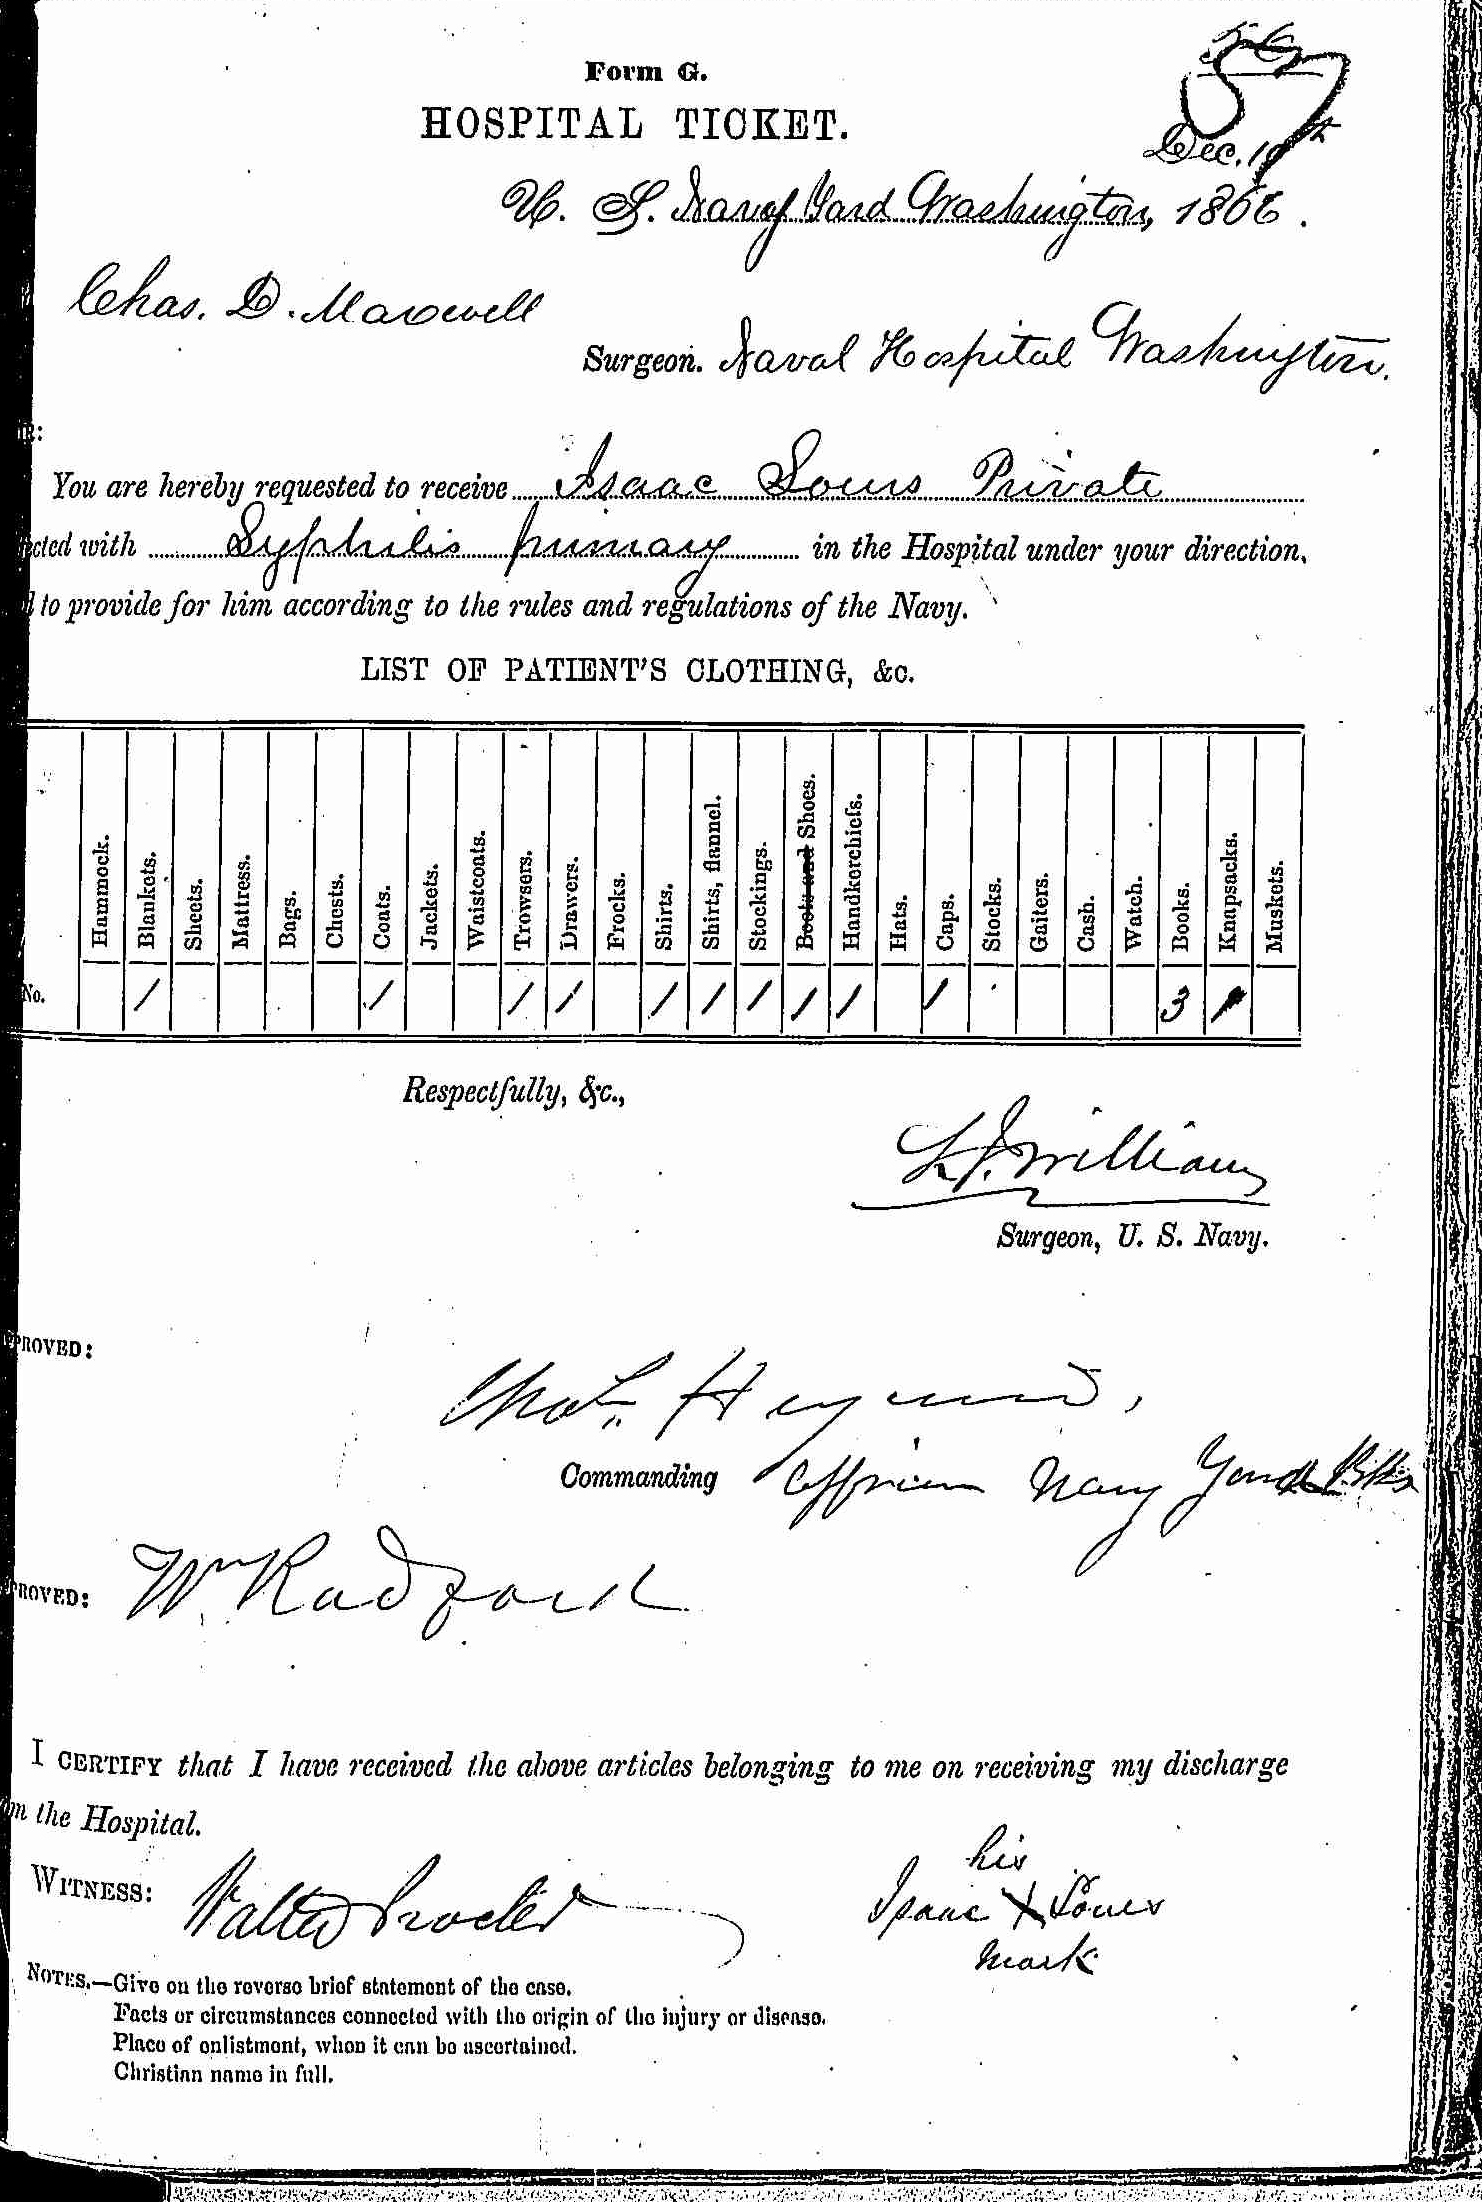 Entry for Isaac Sours (first admission page 1 of 2) in the log Hospital Tickets and Case Papers - Naval Hospital - Washington, D.C. - 1865-68